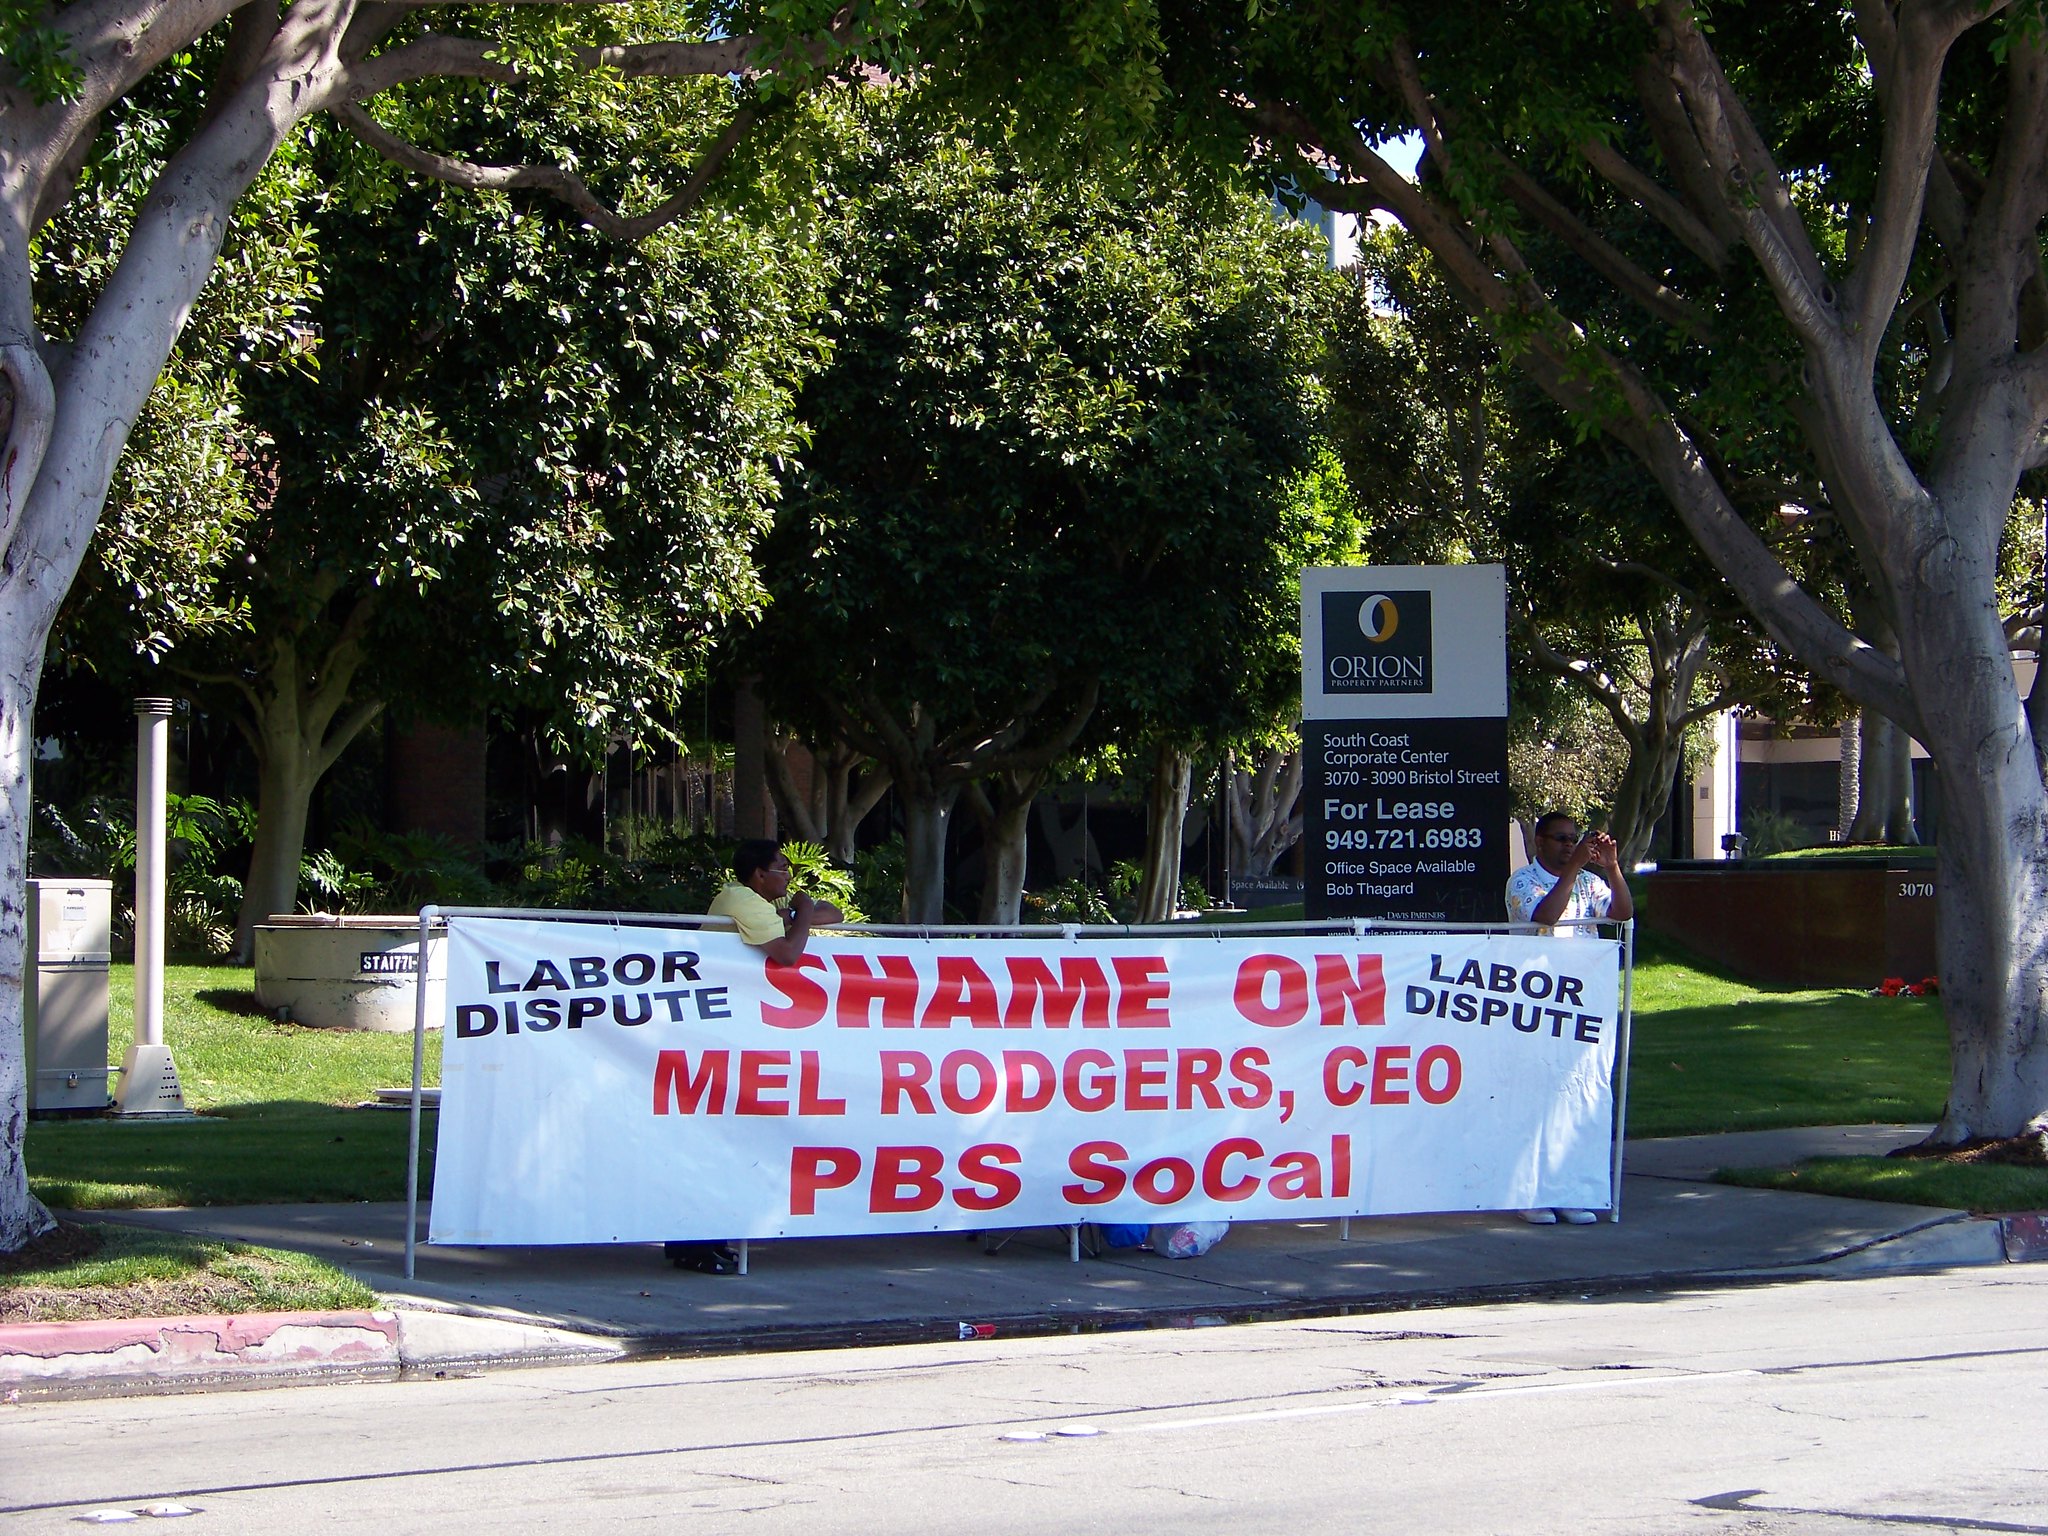 Photo of a person behind a banner that says "Shame on Mel Rogers, CEO, PBS SoCal"